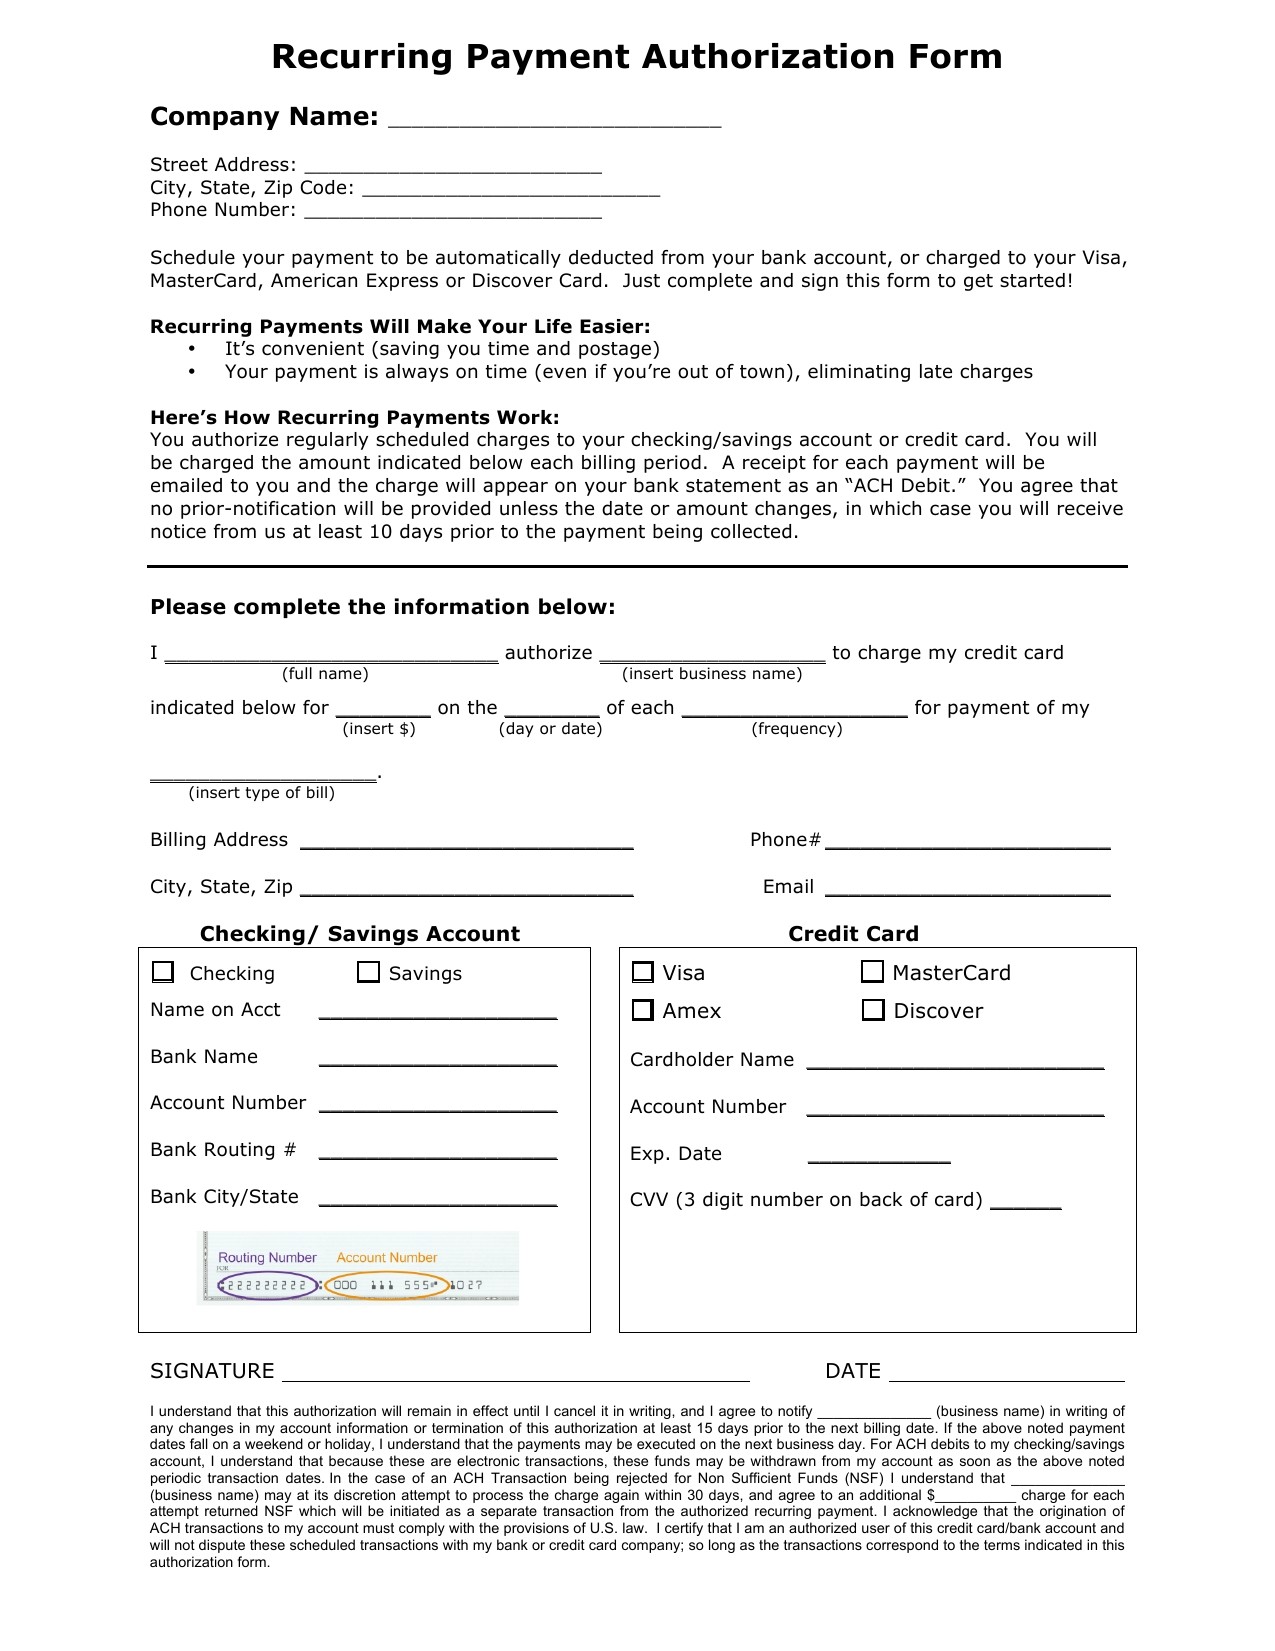 Ach Authorization Form For Business